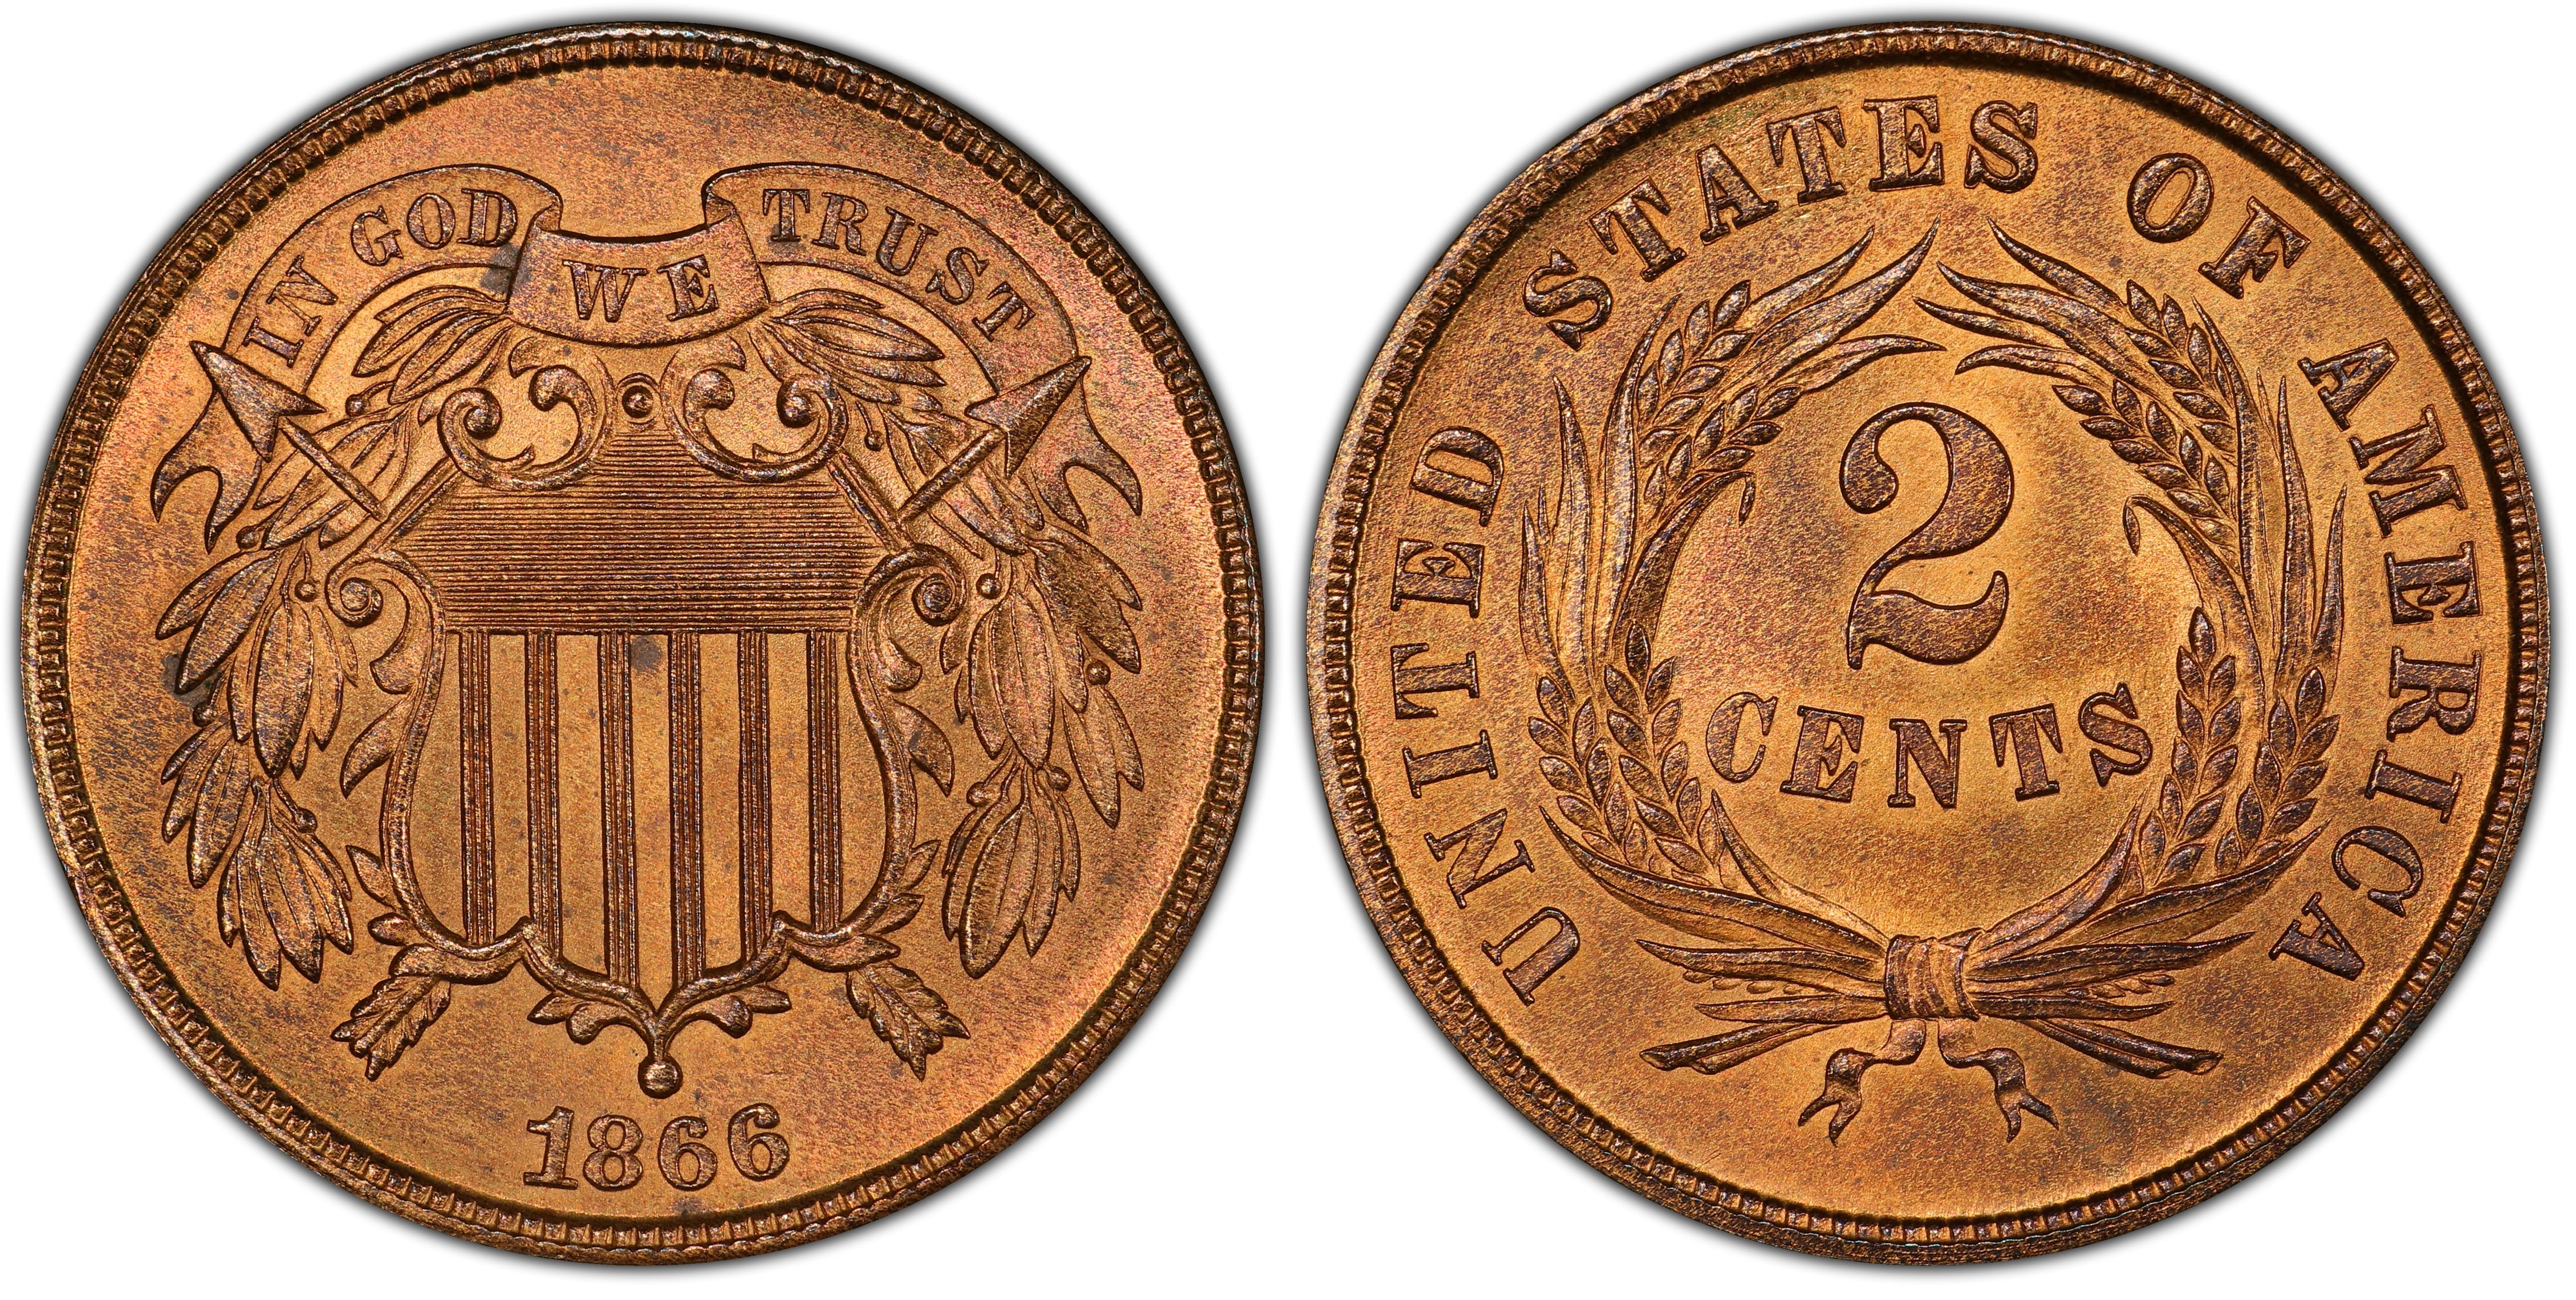 1866 2C, RB (Regular Strike) Two Cent - PCGS CoinFacts